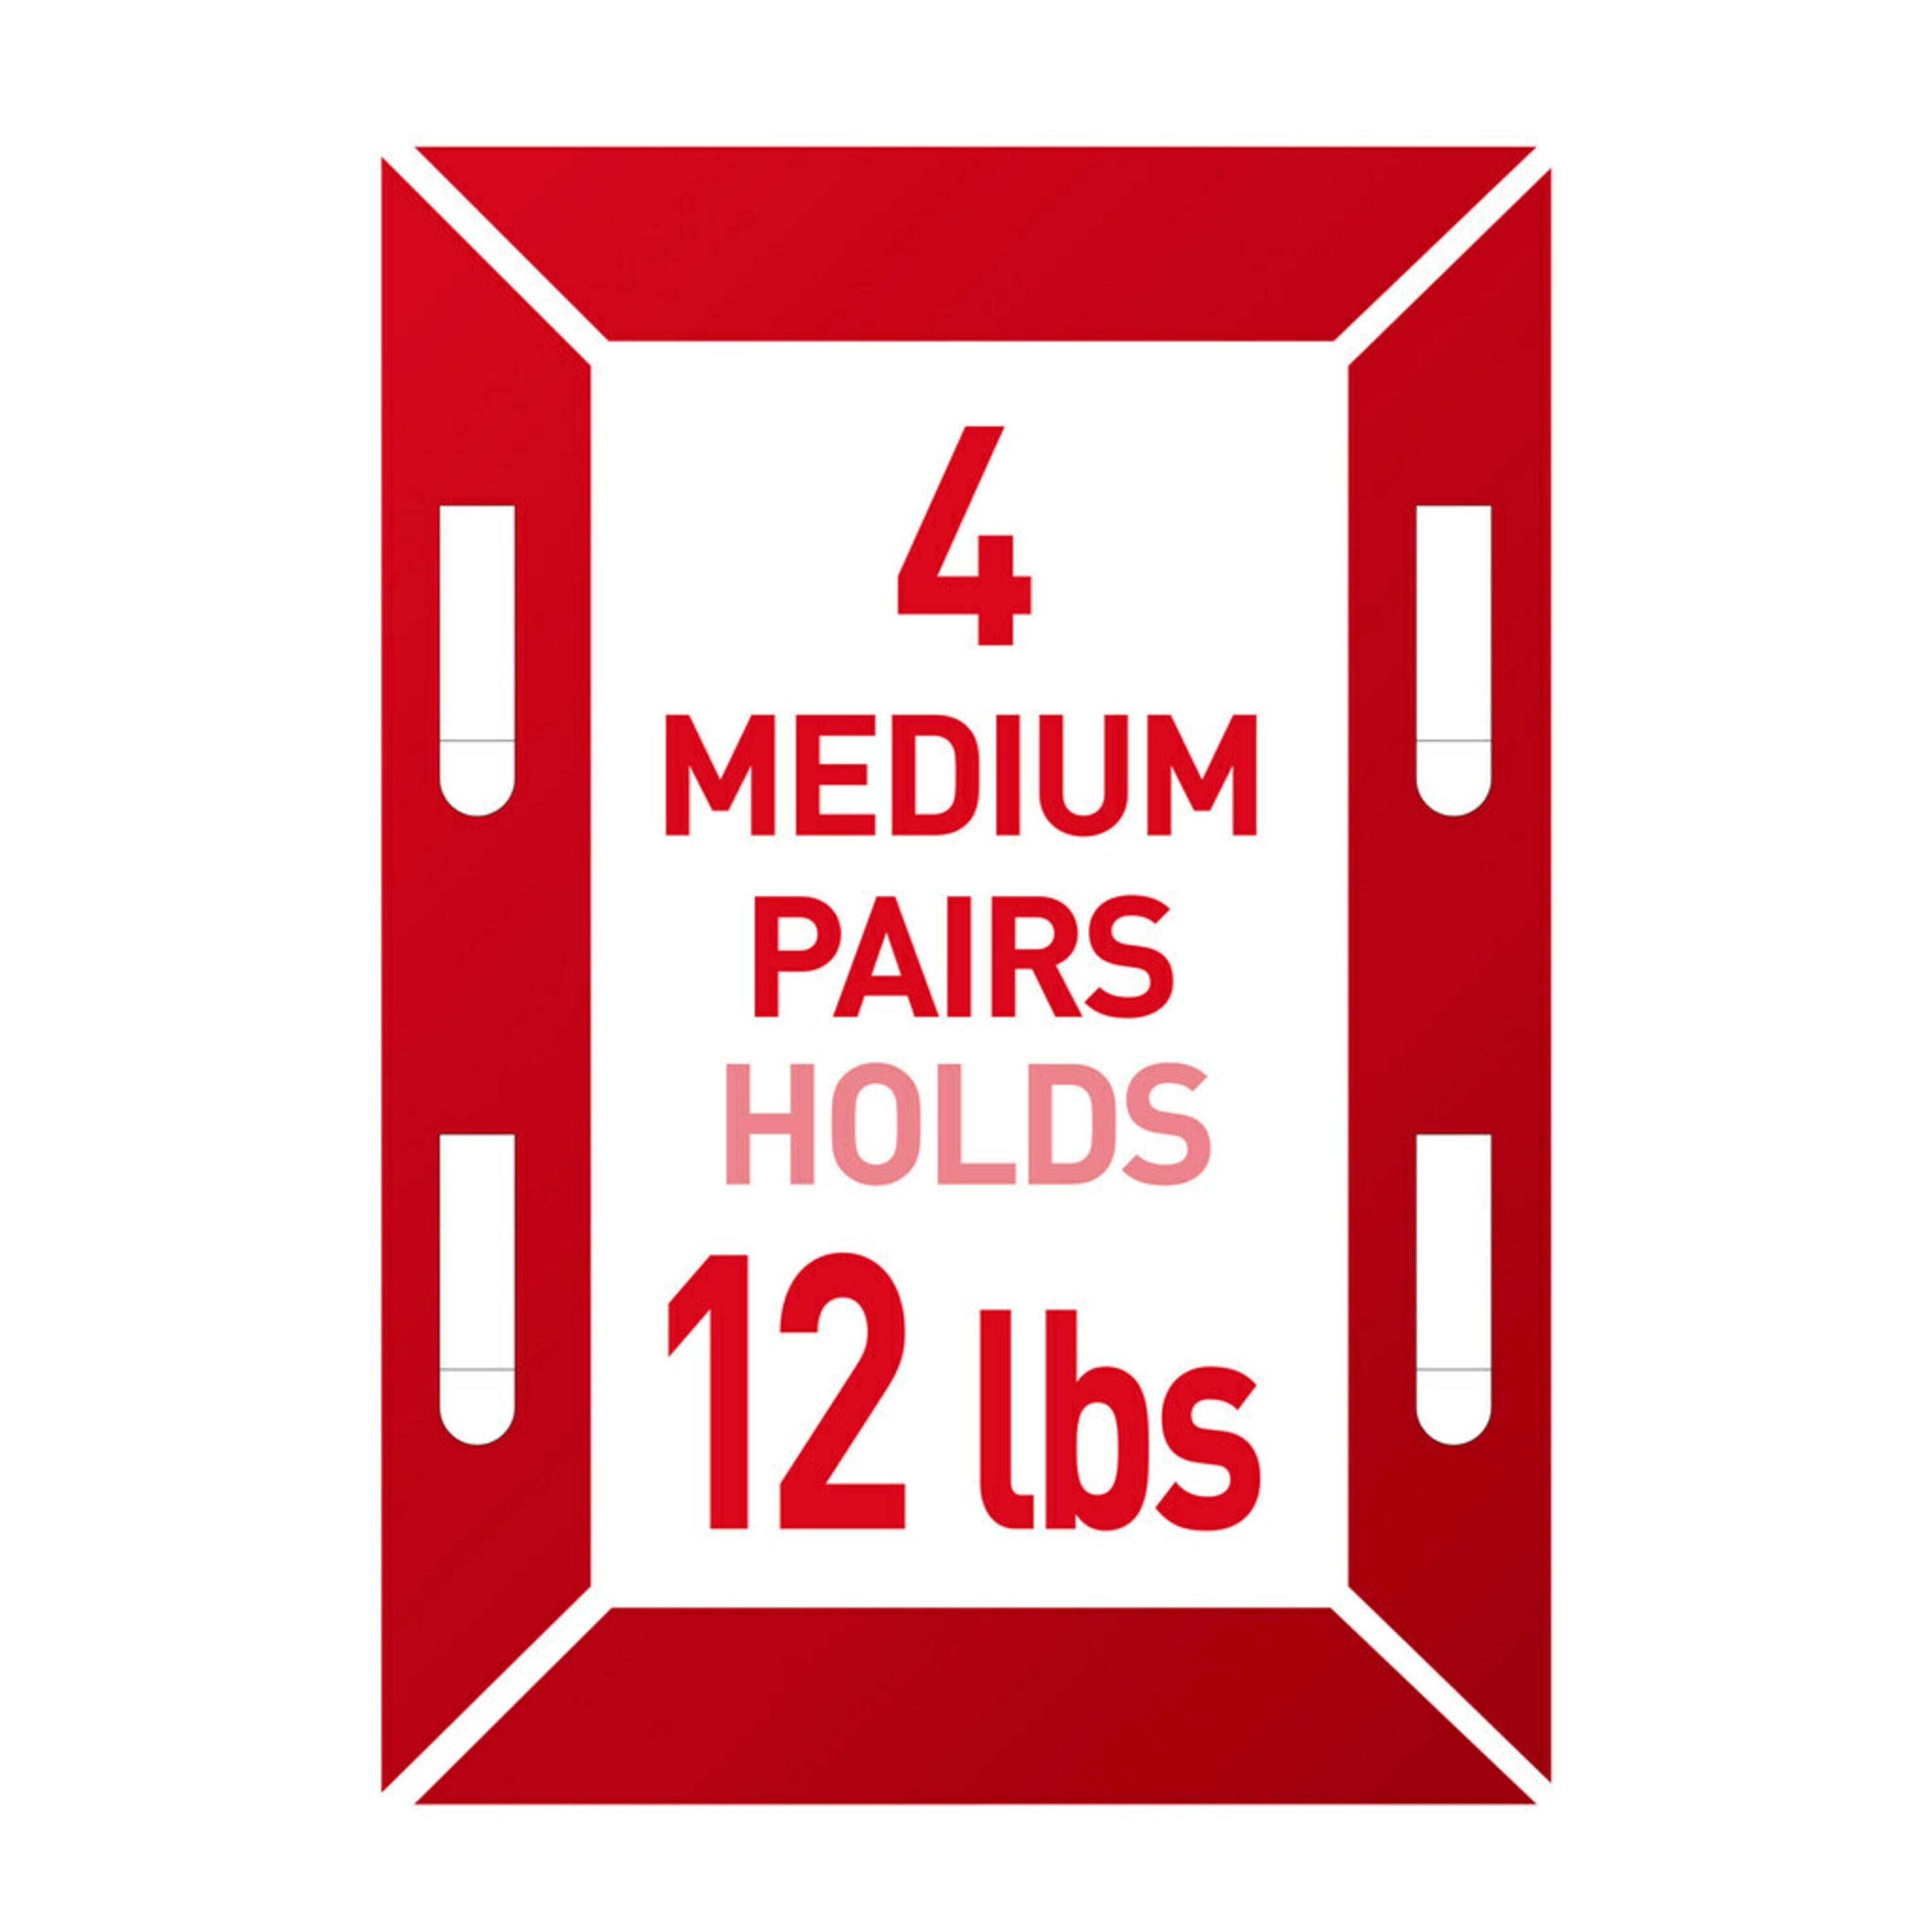 3M Command&#x2122; Medium Picture Hanging Strips